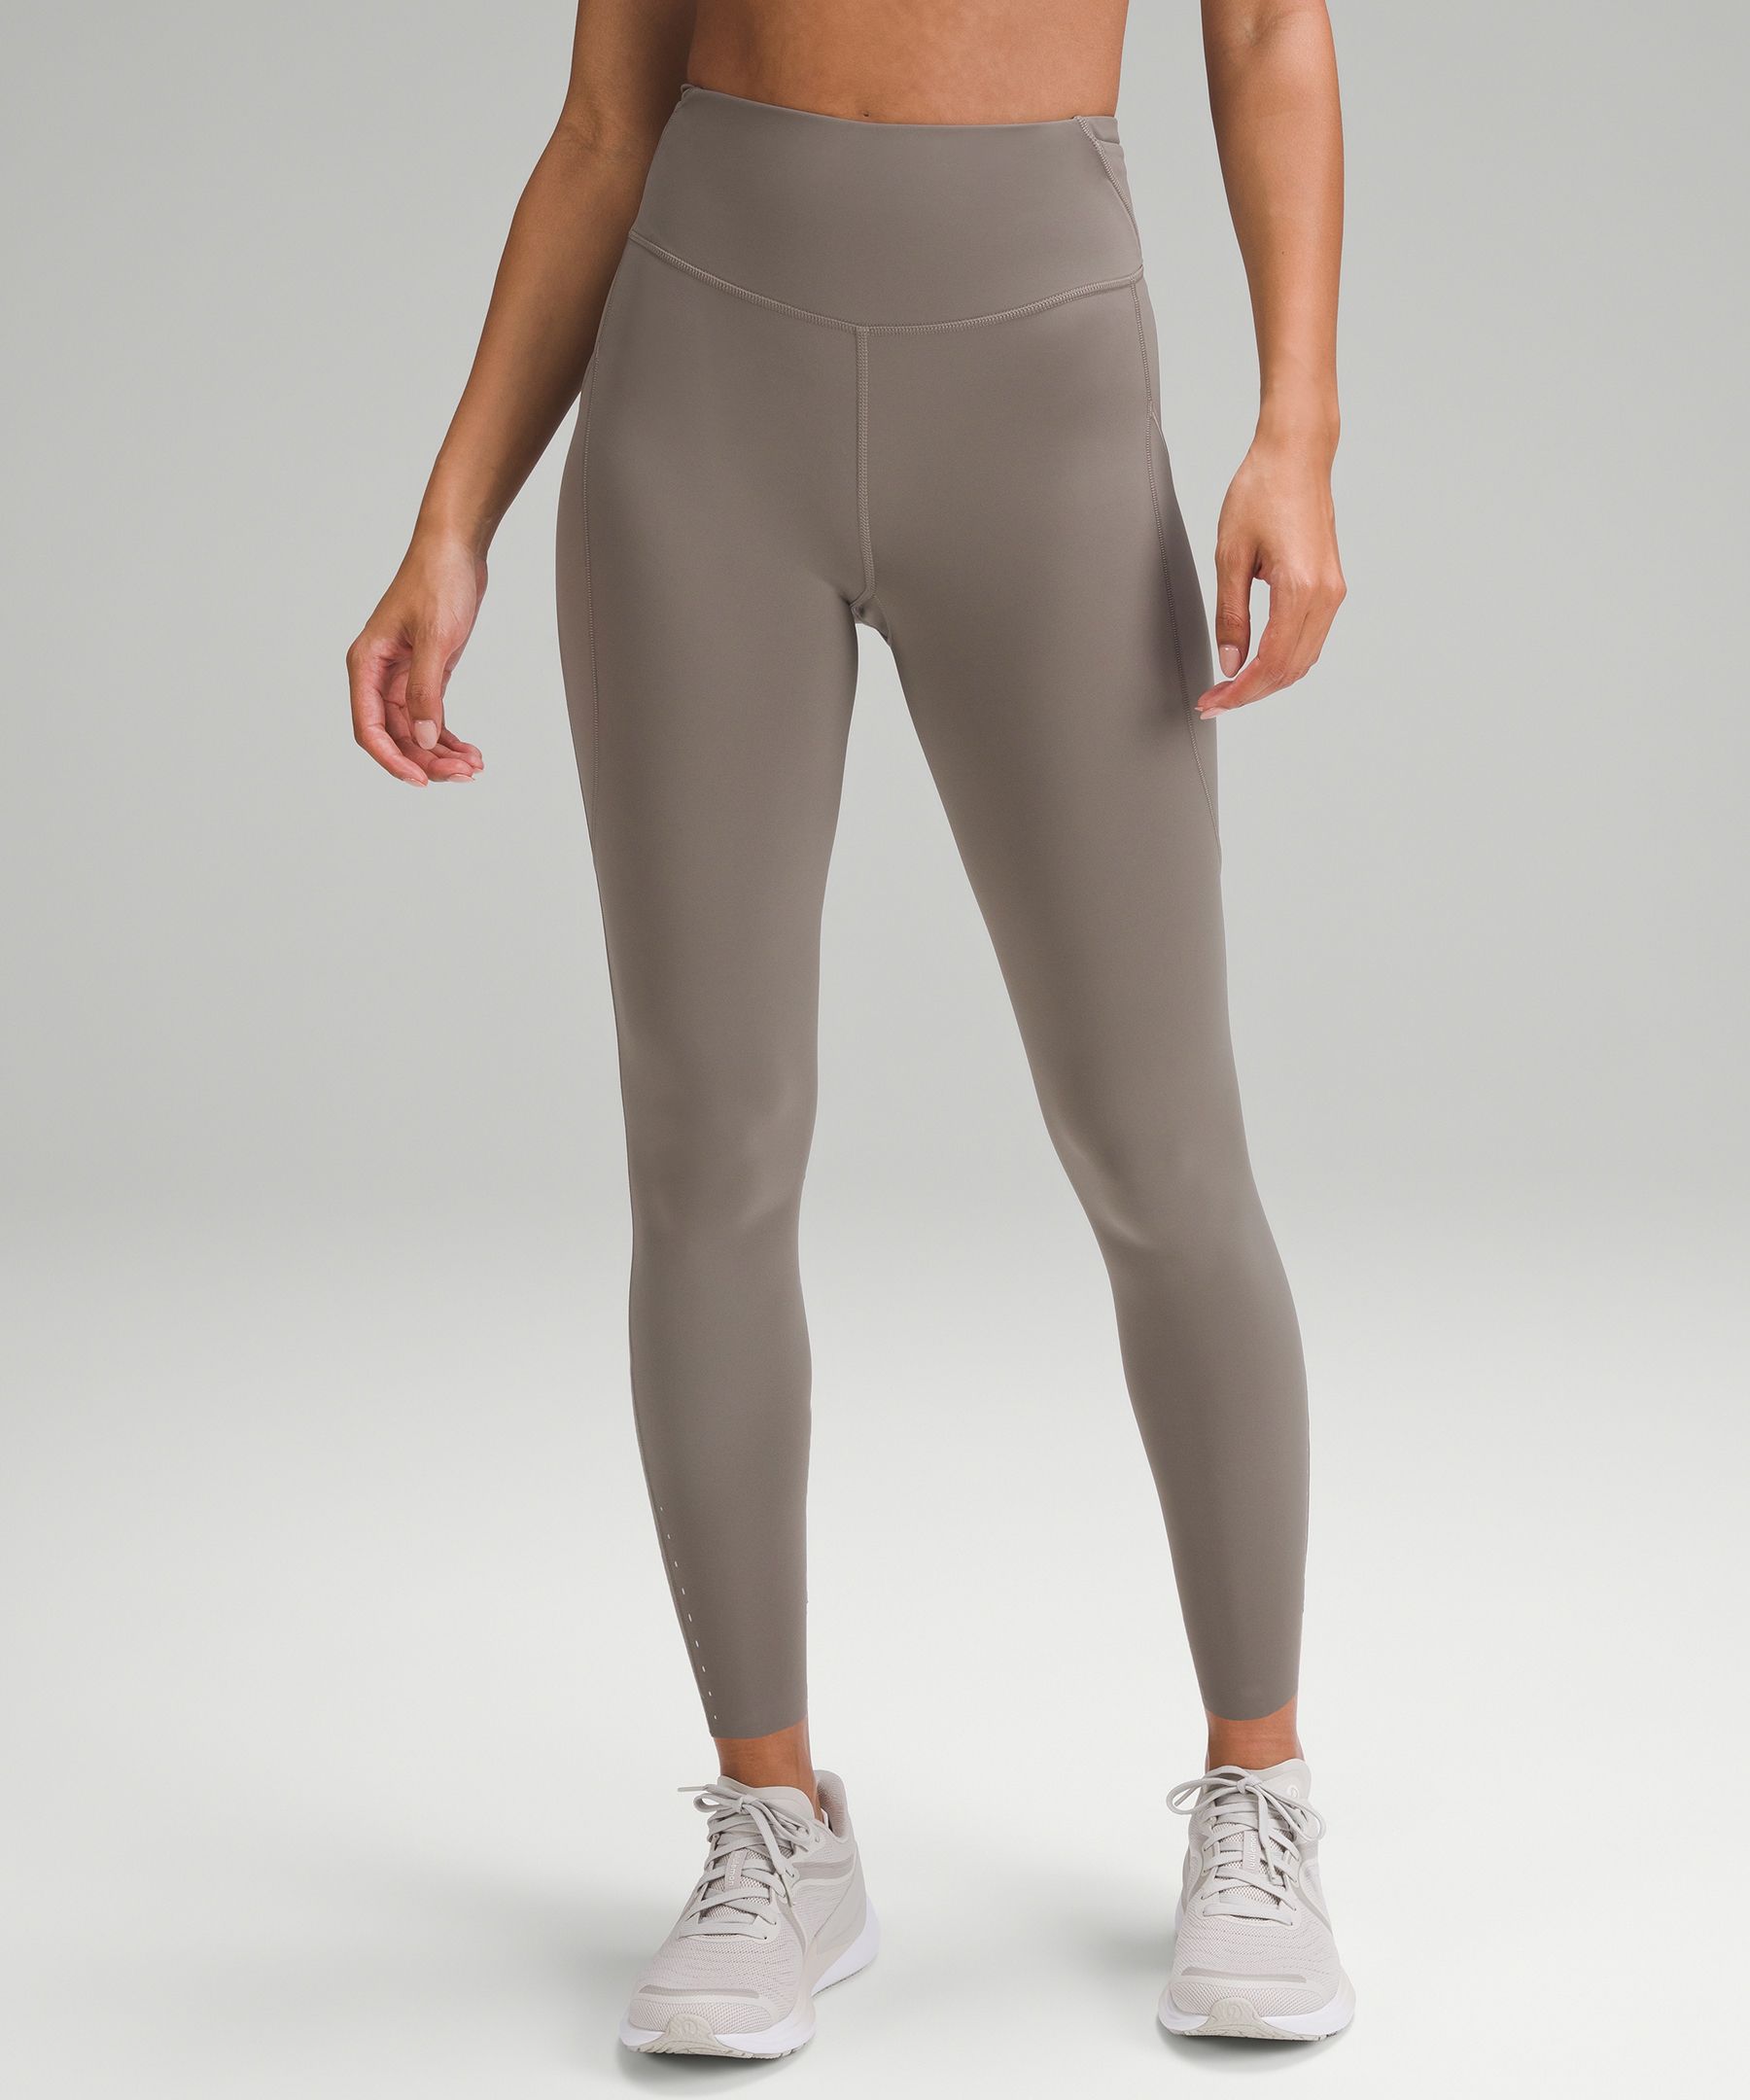 Lululemon Fast and Free High-Rise Tight 25” Pockets